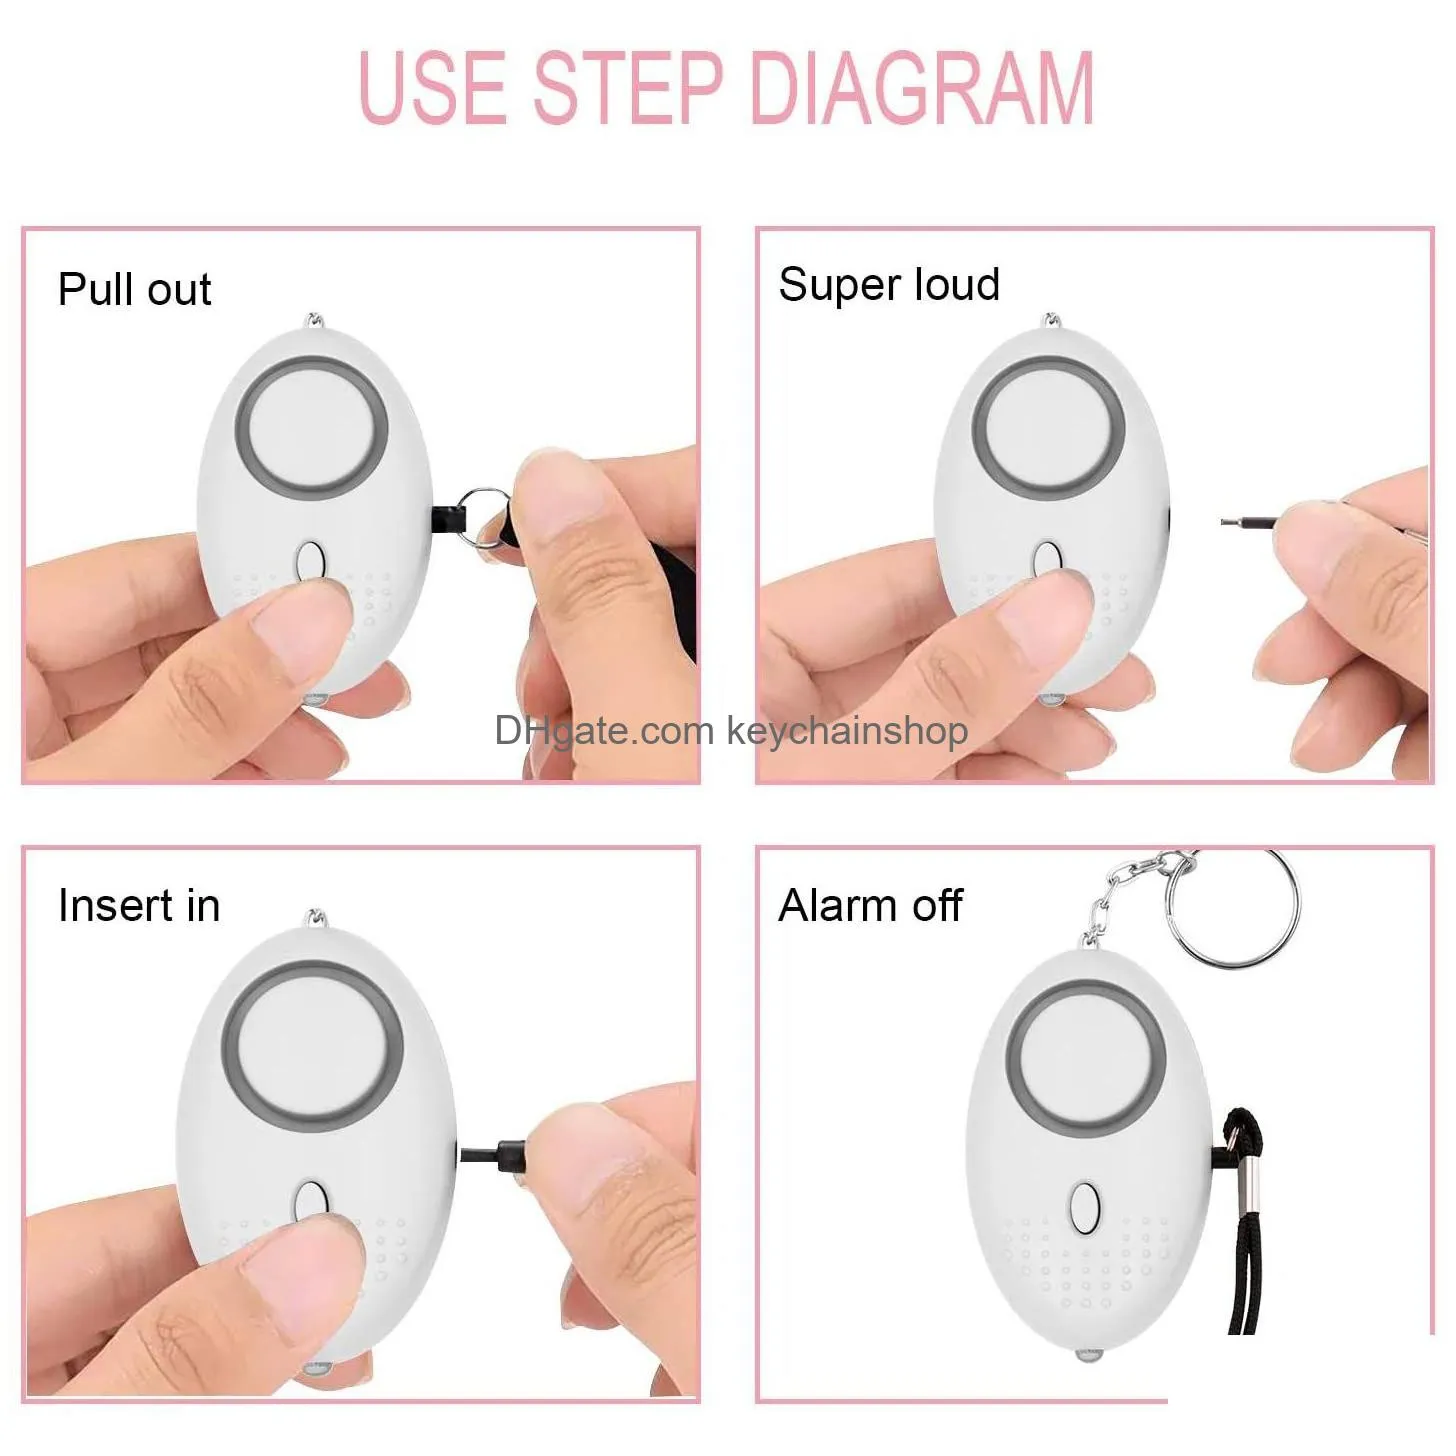 Wholesale 100X Personal Self Defense Alarm Girl Women Old Man Security Protect Alert Safety Scream Loud Keychain 130Db Egg Drop Deliv Dhrym